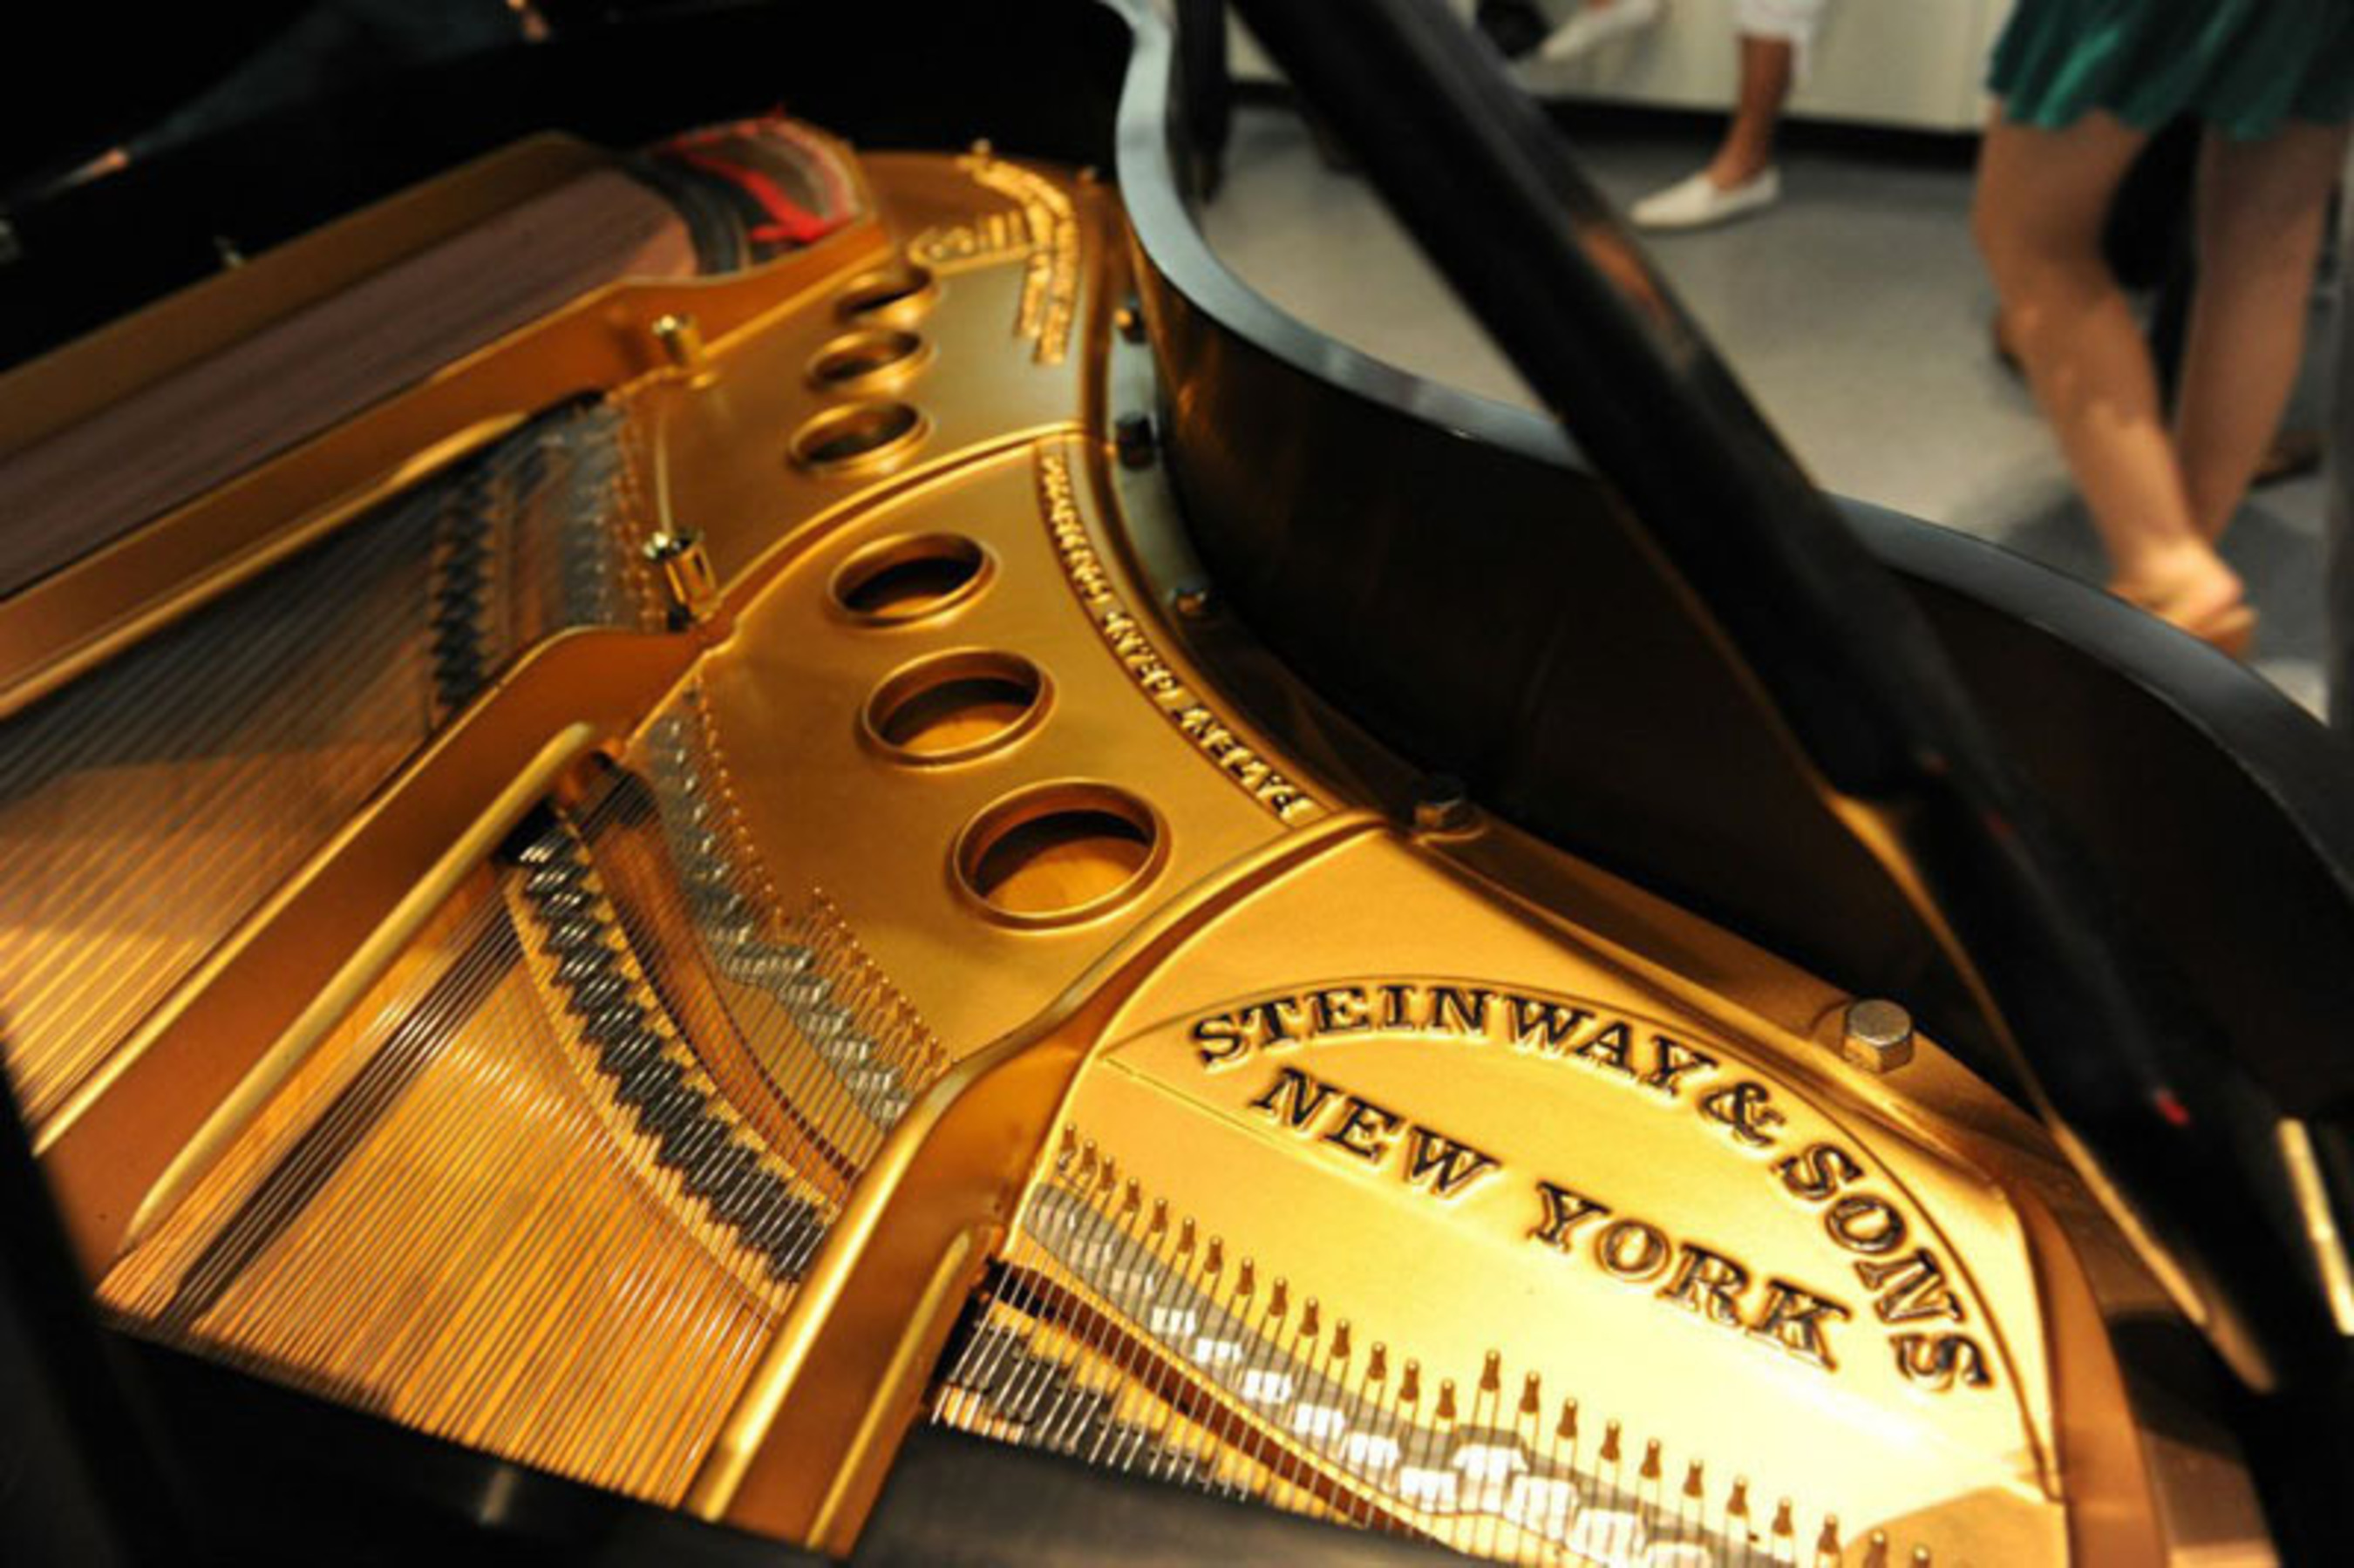 Specialist Steinway Piano dealer showcases Golden Age Steinway Grands alongside Luxury Cars. (PRNewsFoto/Park Avenue Pianos) (PRNewsFoto/PARK AVENUE PIANOS)